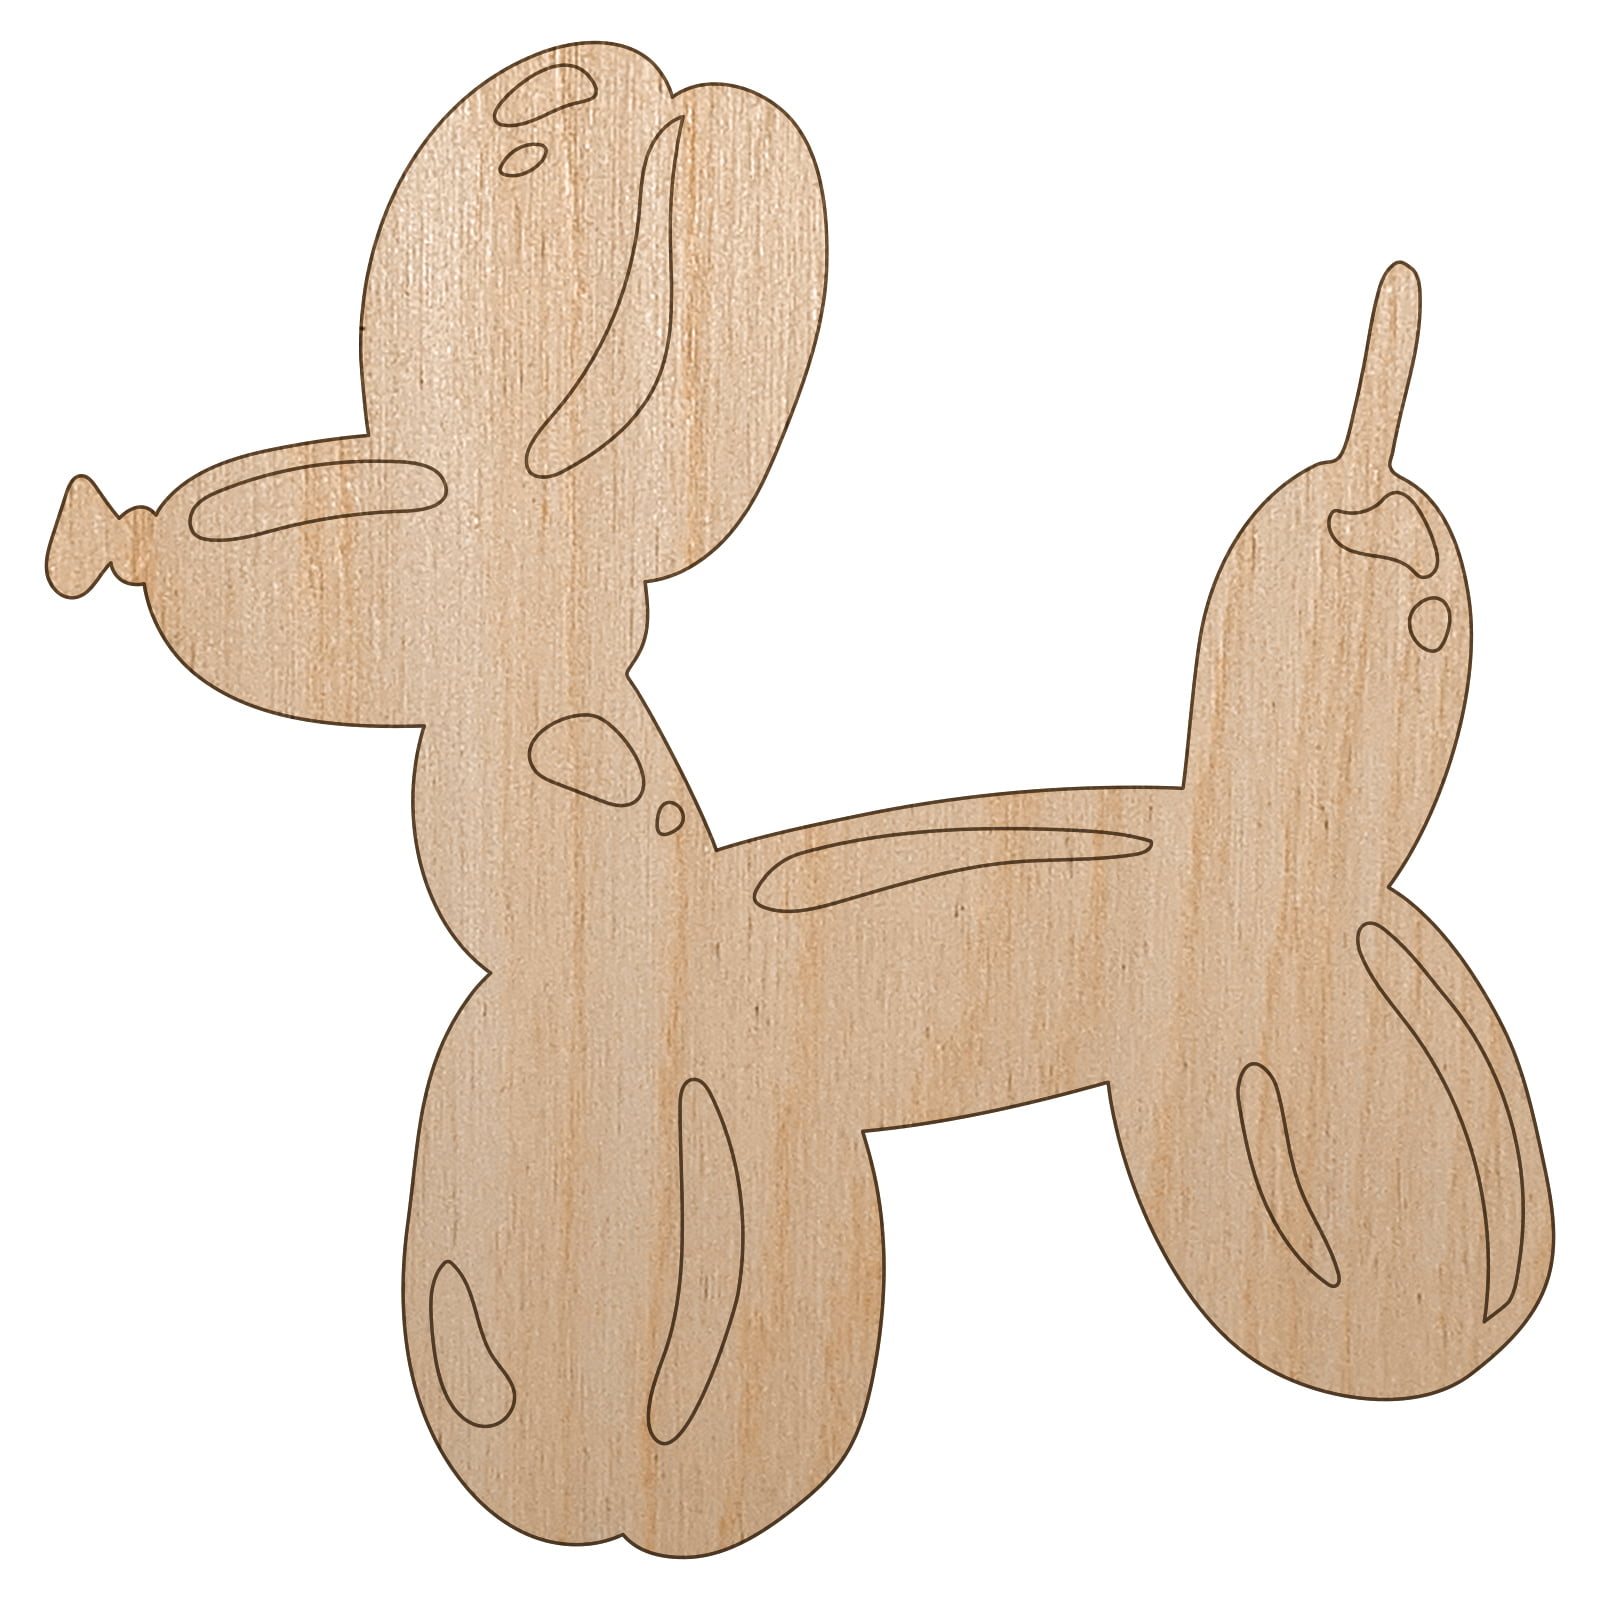 Balloon Animal Dog Wood Shape Unfinished Piece Cutout Craft DIY Projects -   Inch Size - 1/4 Inch Thick 